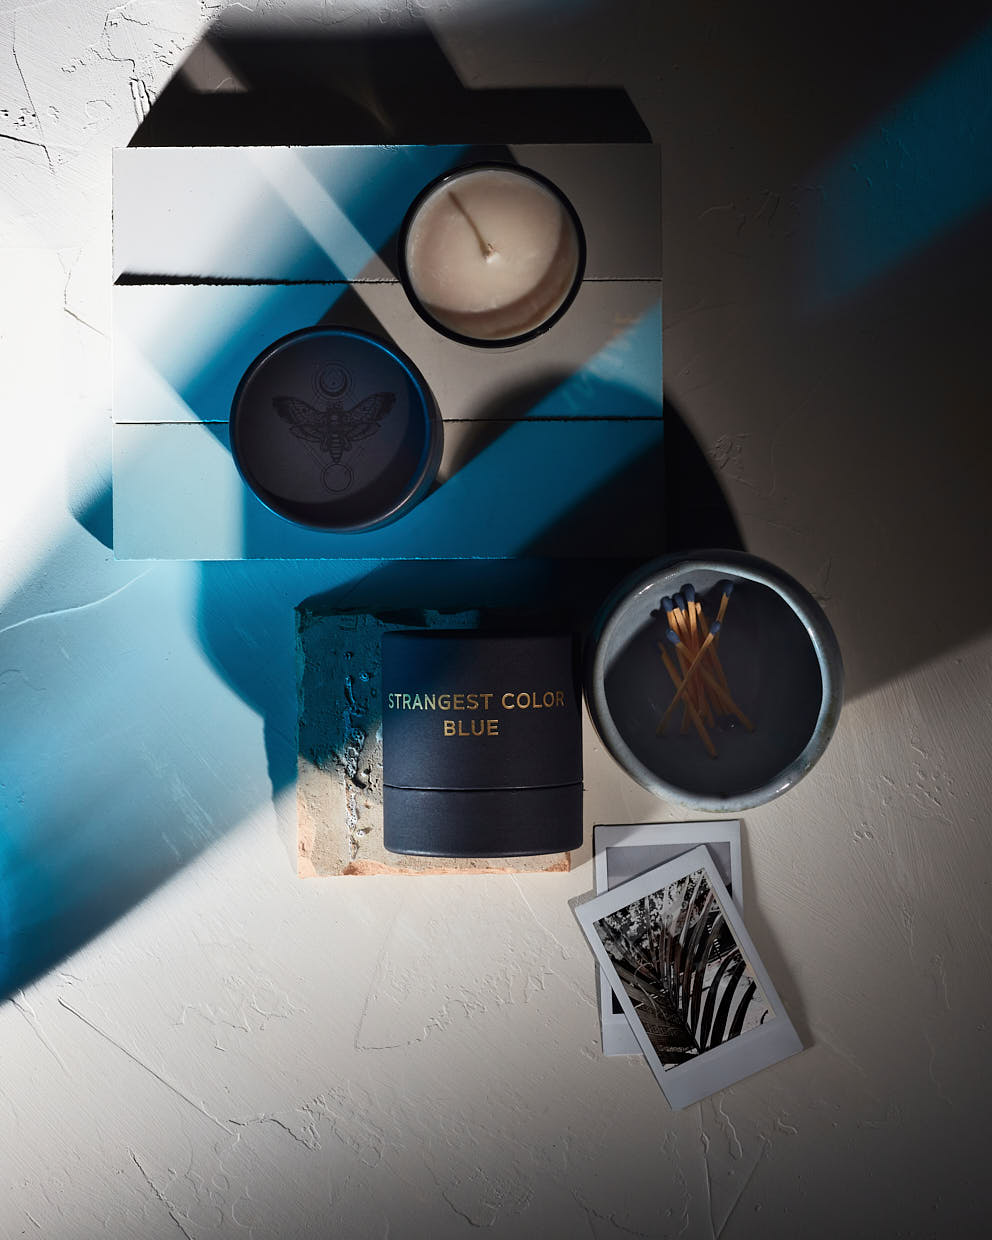 Packaging design by Rebecca Snyder for Tatine Candles, dark, wild & deep collection. Strangest-color blue. Product Photography Services by Matt Snyder A LA MODE designs.